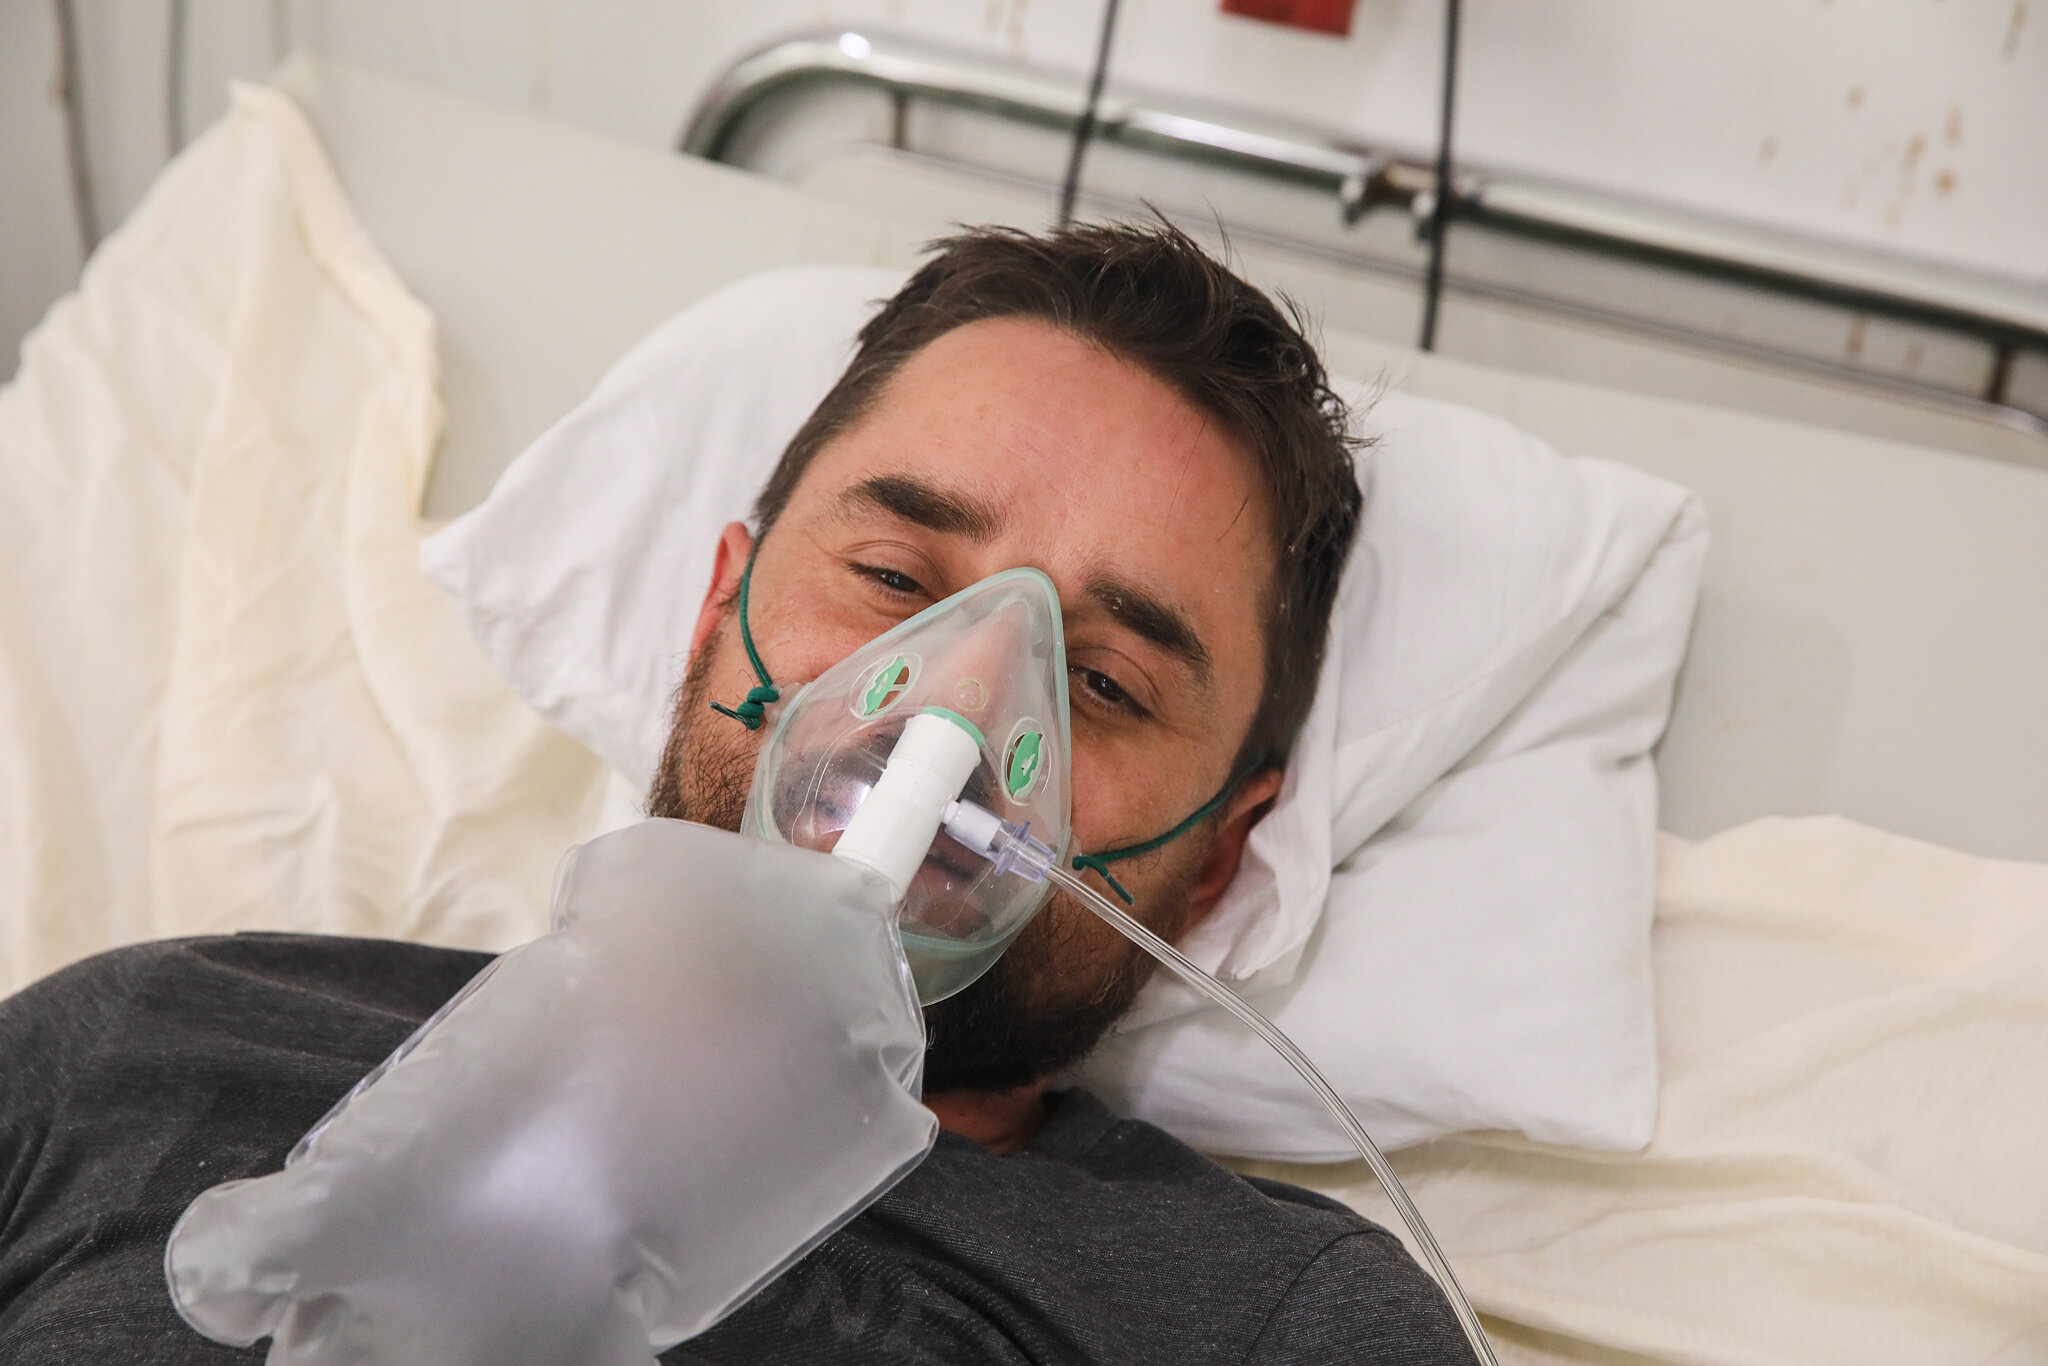 Taras Biyovsky, a patient and a father of five, is lying on the hospital bed wearing an oxygen mask in intensive care unit at Kolomyia District Hospital in Ivano-Frankivsk Oblast on March 16, 2021.